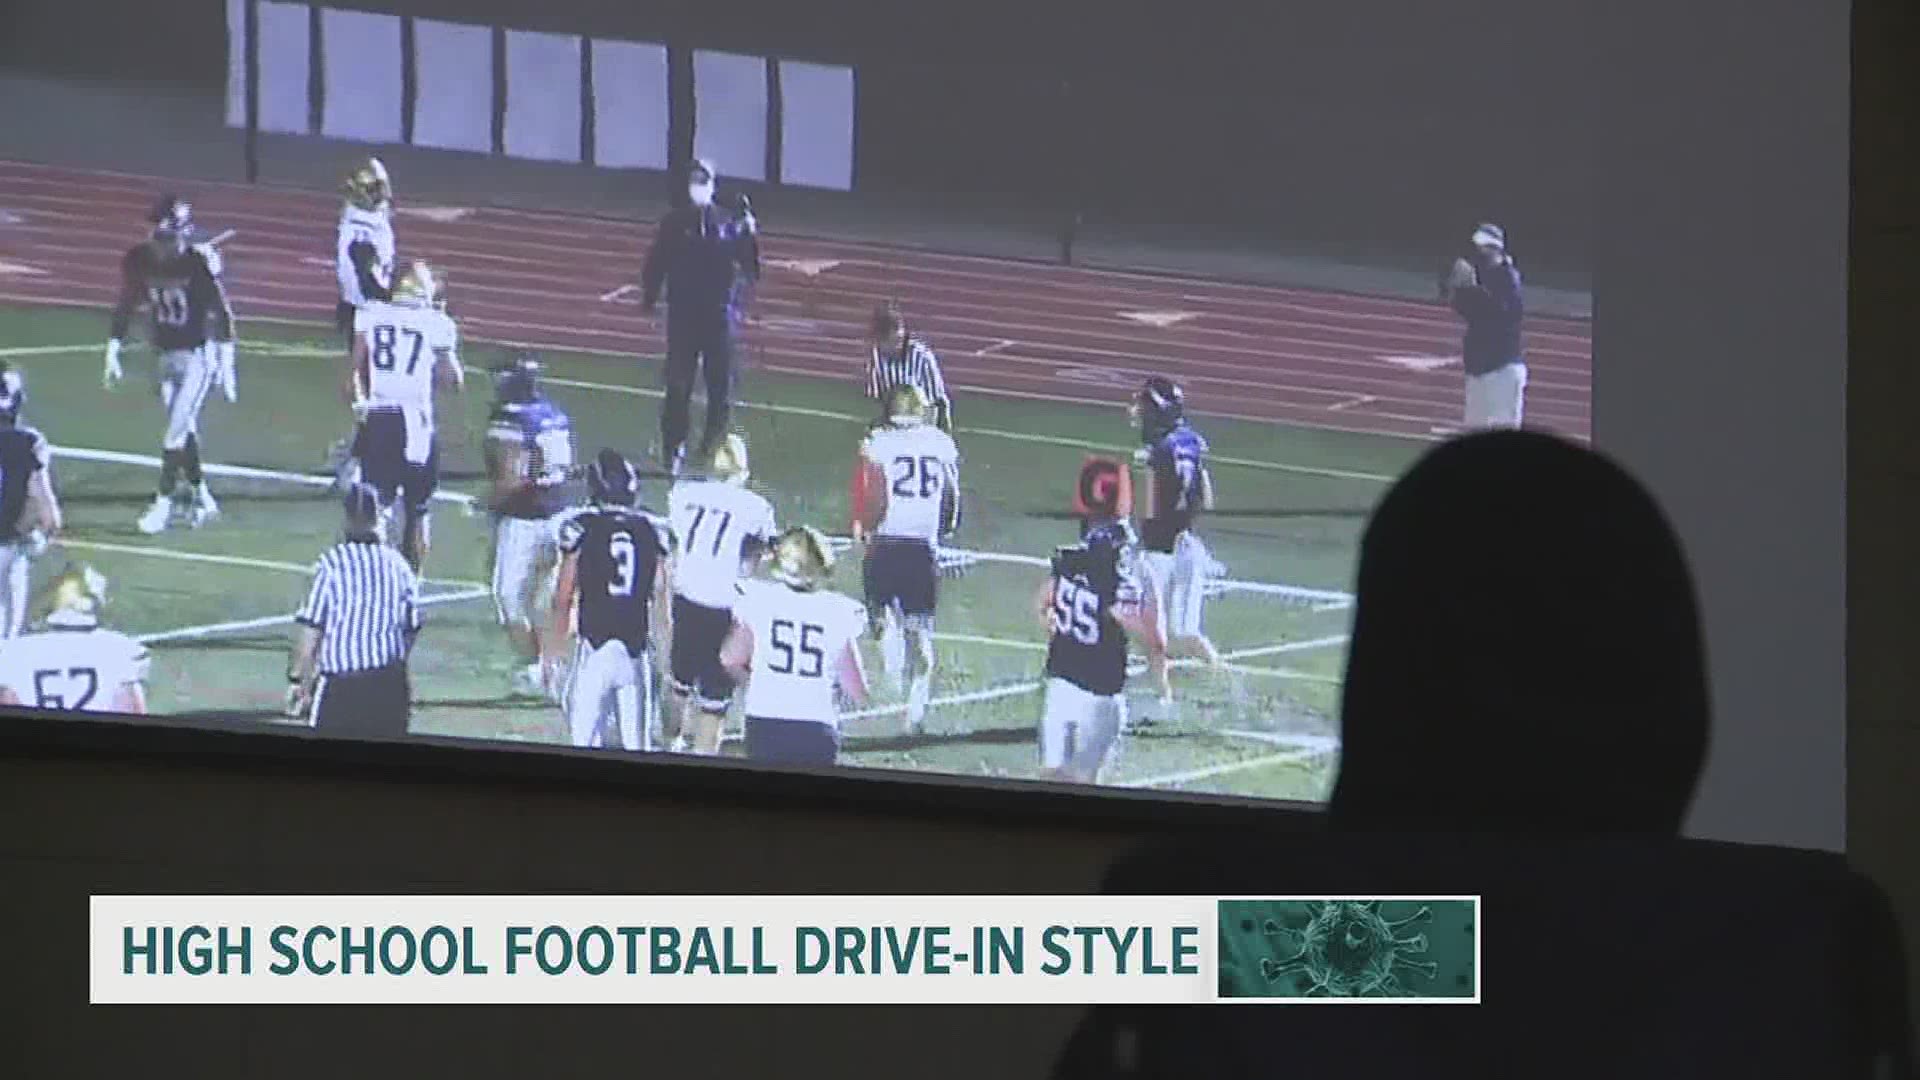 As organizations conform to COVID-19 guidelines, Penn Cinema Drive-In is streaming the Manheim Township vs. La Salle College High school Friday night football game